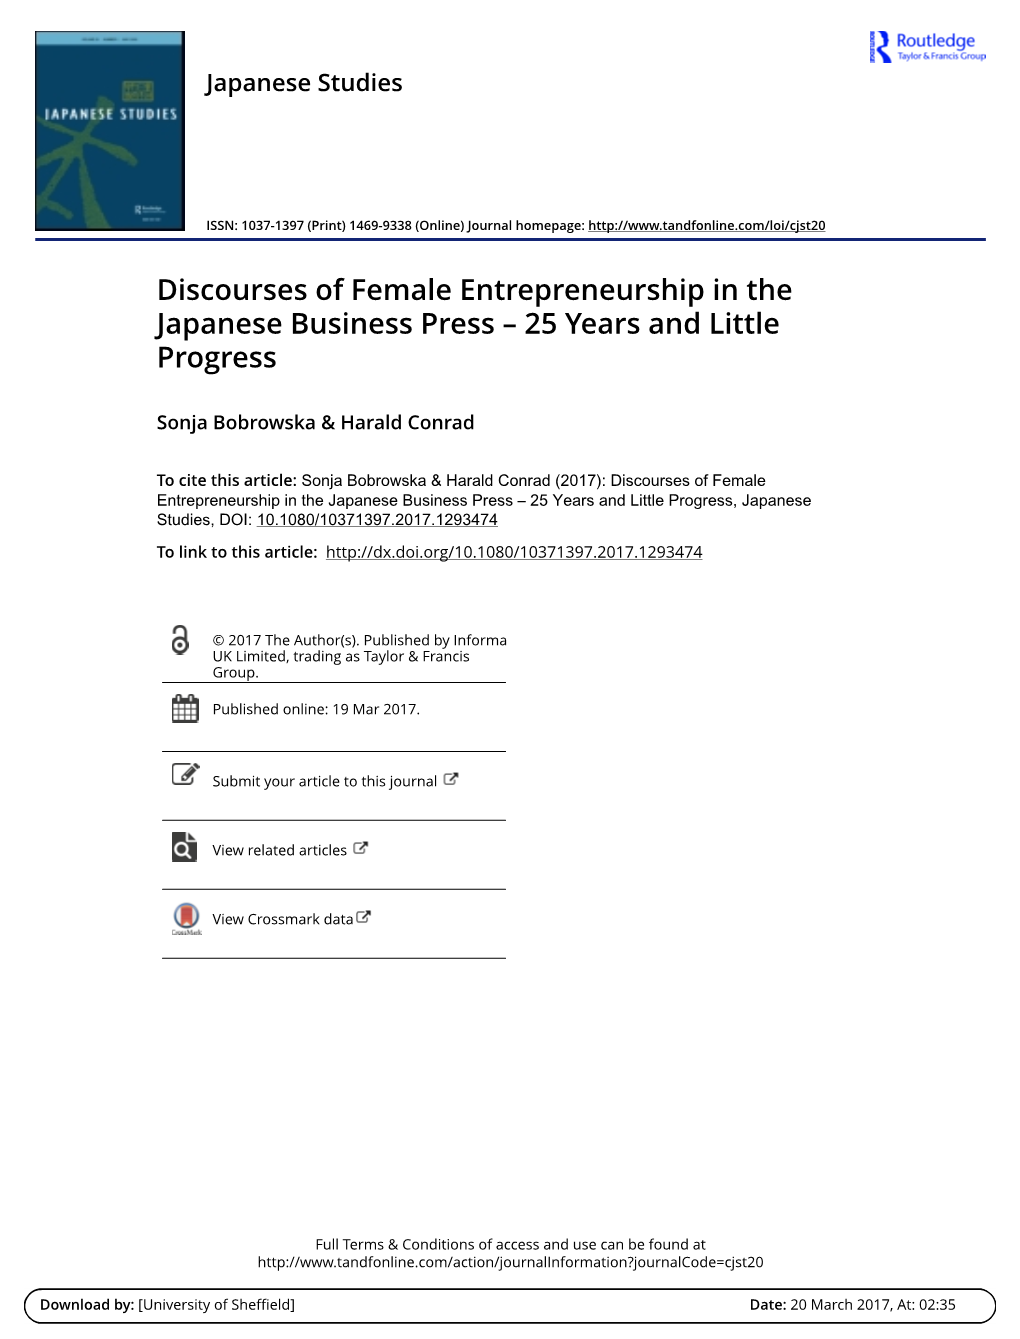 Discourses of Female Entrepreneurship in the Japanese Business Press – 25 Years and Little Progress